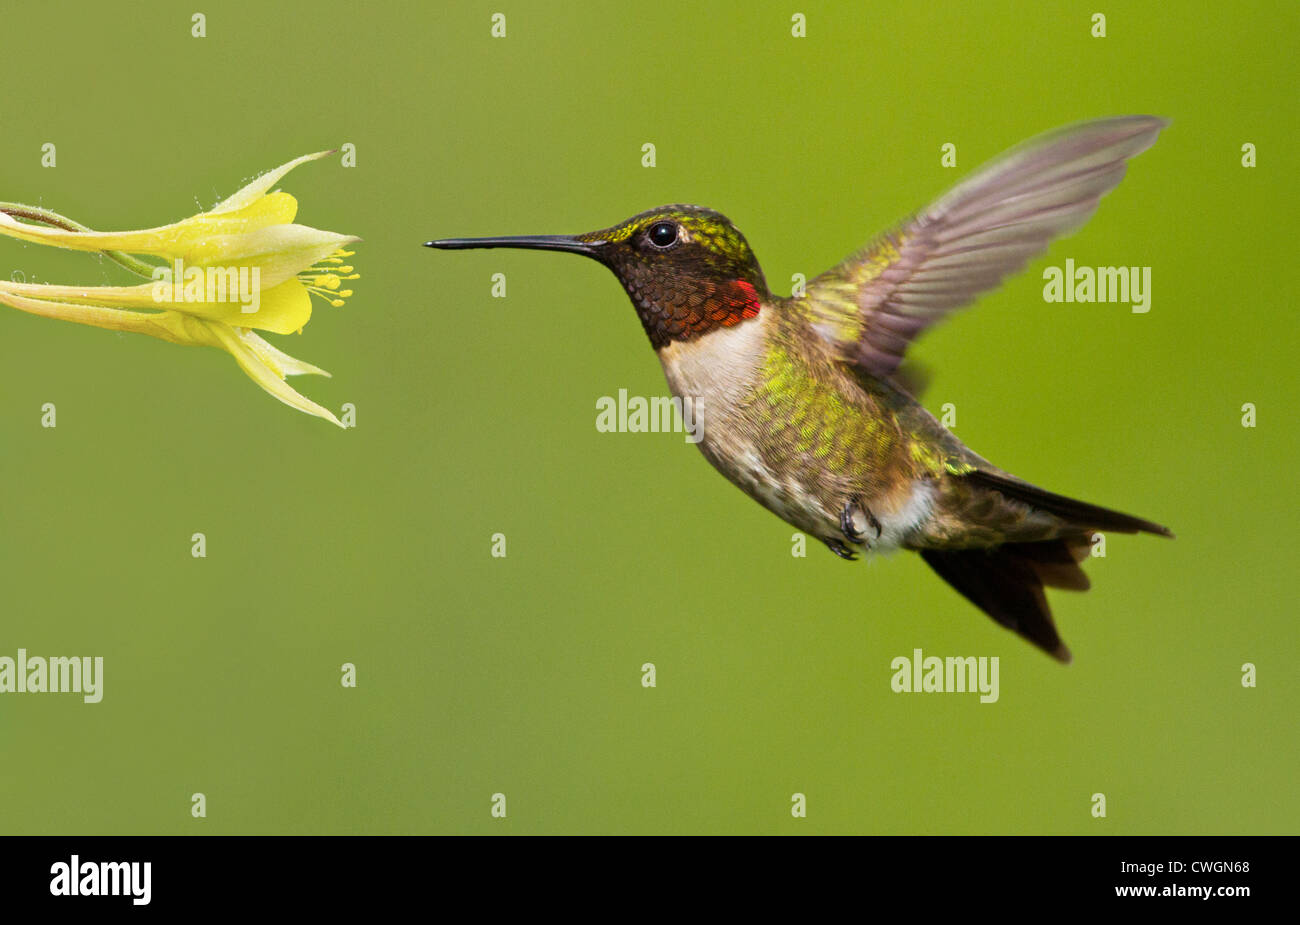 Ruby-Throated Hummingbird in flight in front of a yellow flower. The bird is isolated on a perfect green background. Stock Photo